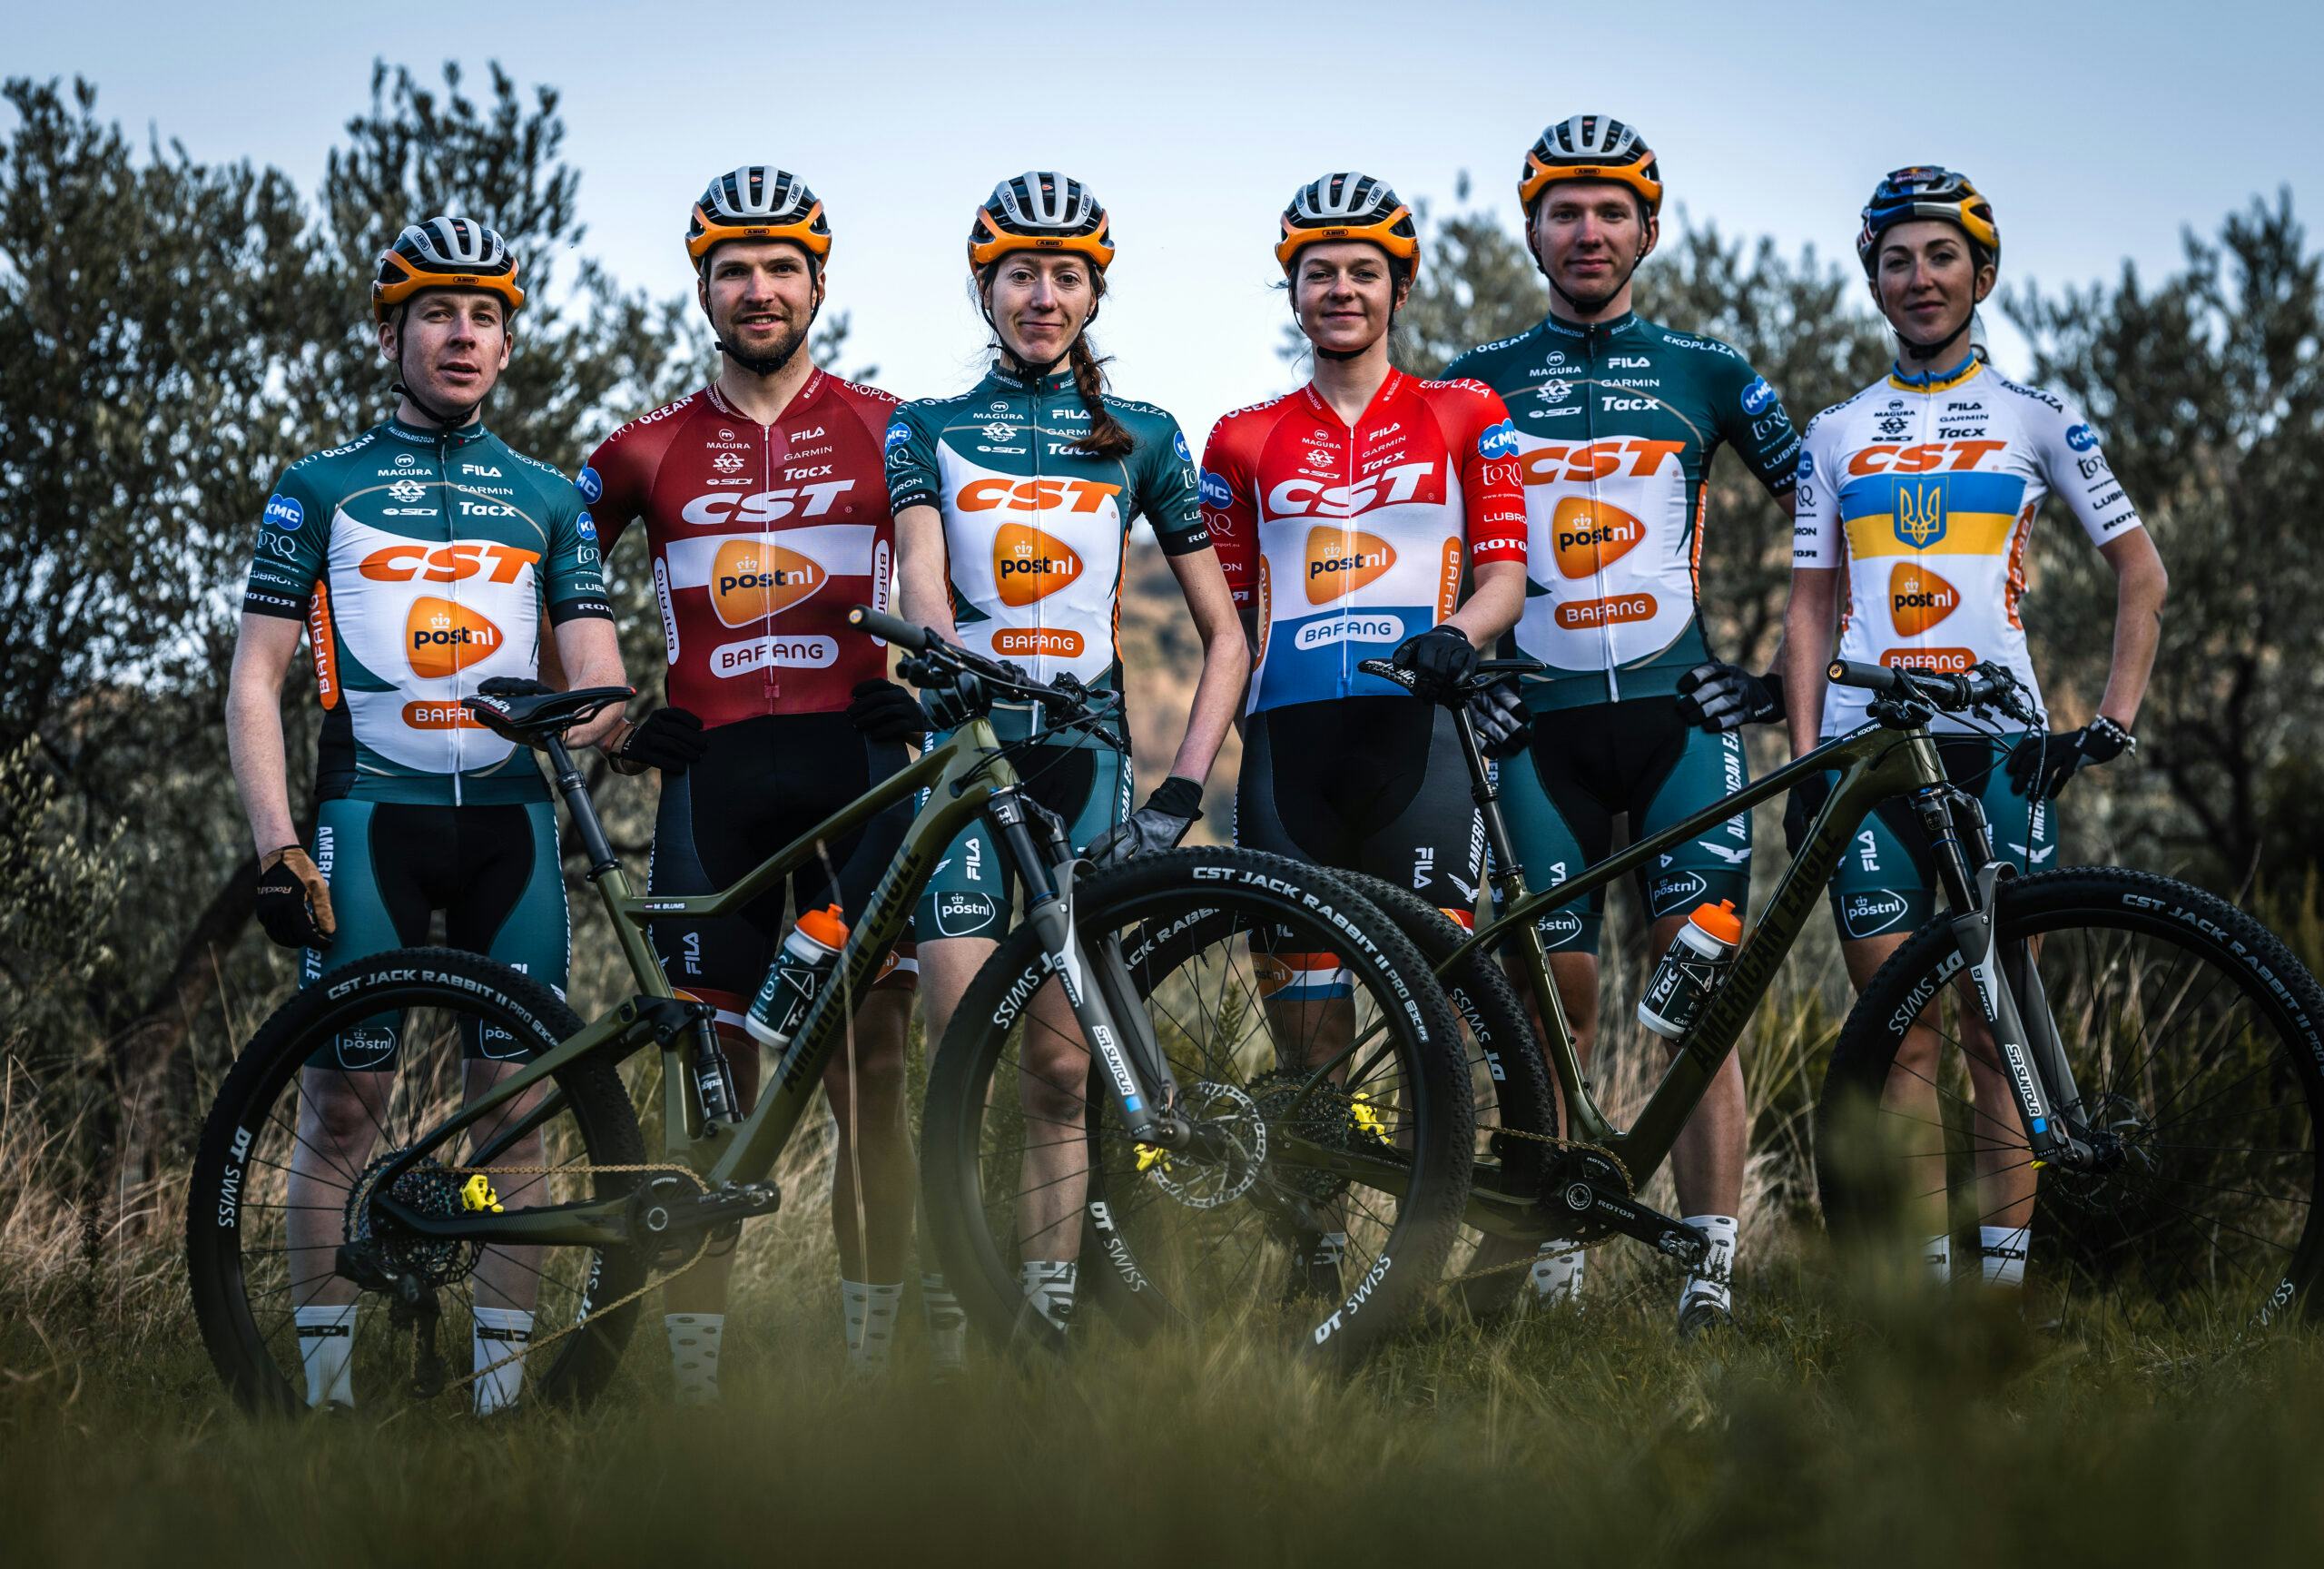 MTB Racing Team - “Develop new products not only from a theoretical perspective” - photo’s Vincent Engel.